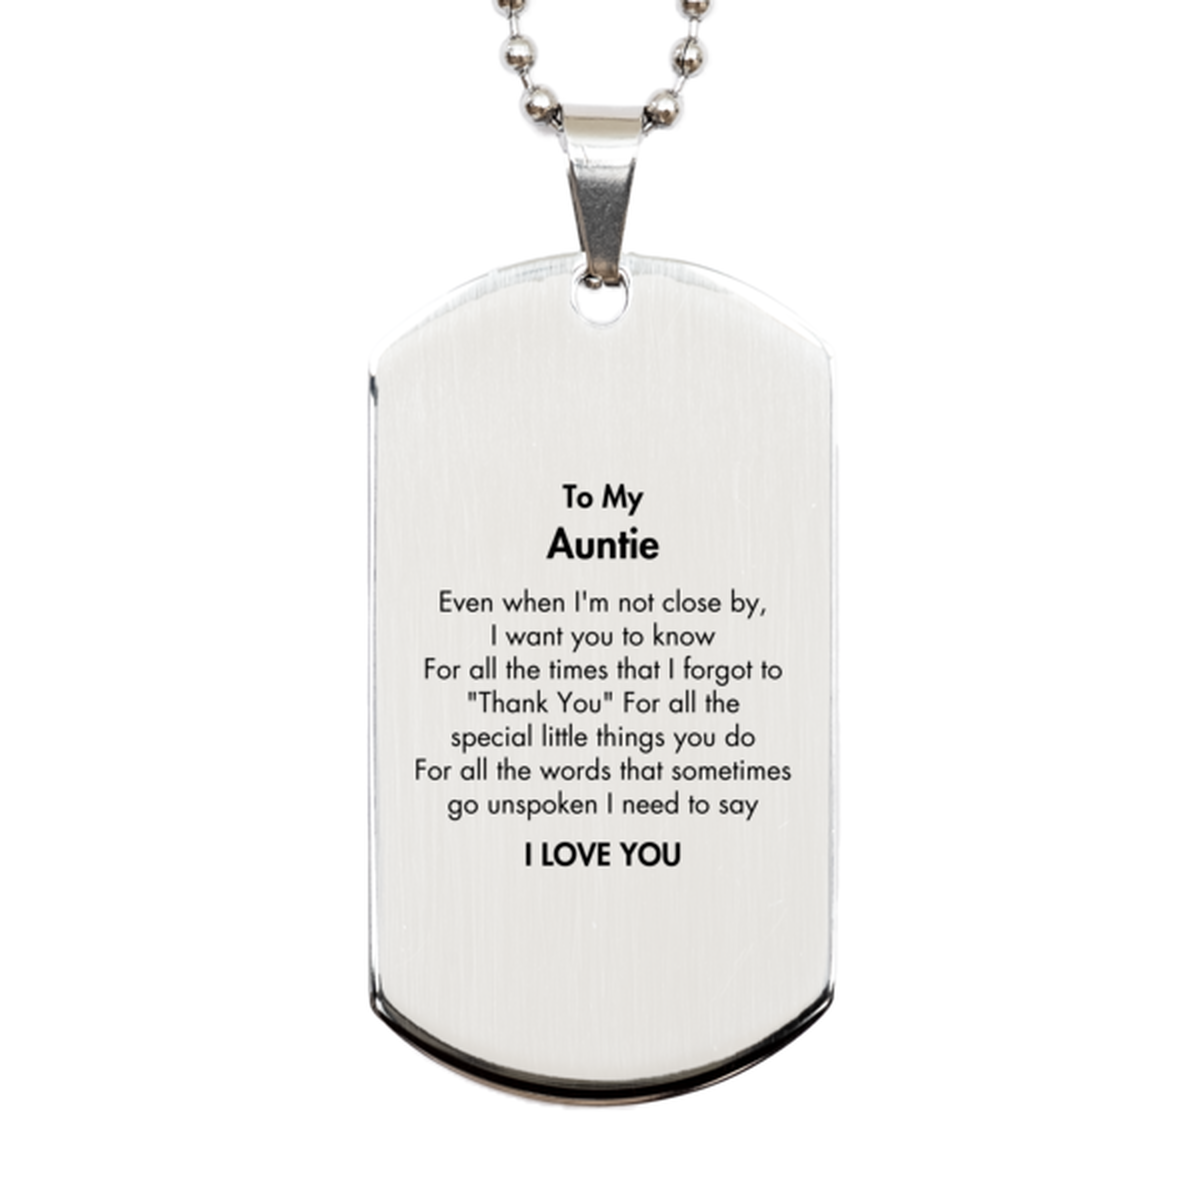 Thank You Gifts for Auntie, Keepsake Silver Dog Tag Gifts for Auntie Birthday Mother's day Father's Day Auntie For all the words That sometimes go unspoken I need to say I LOVE YOU